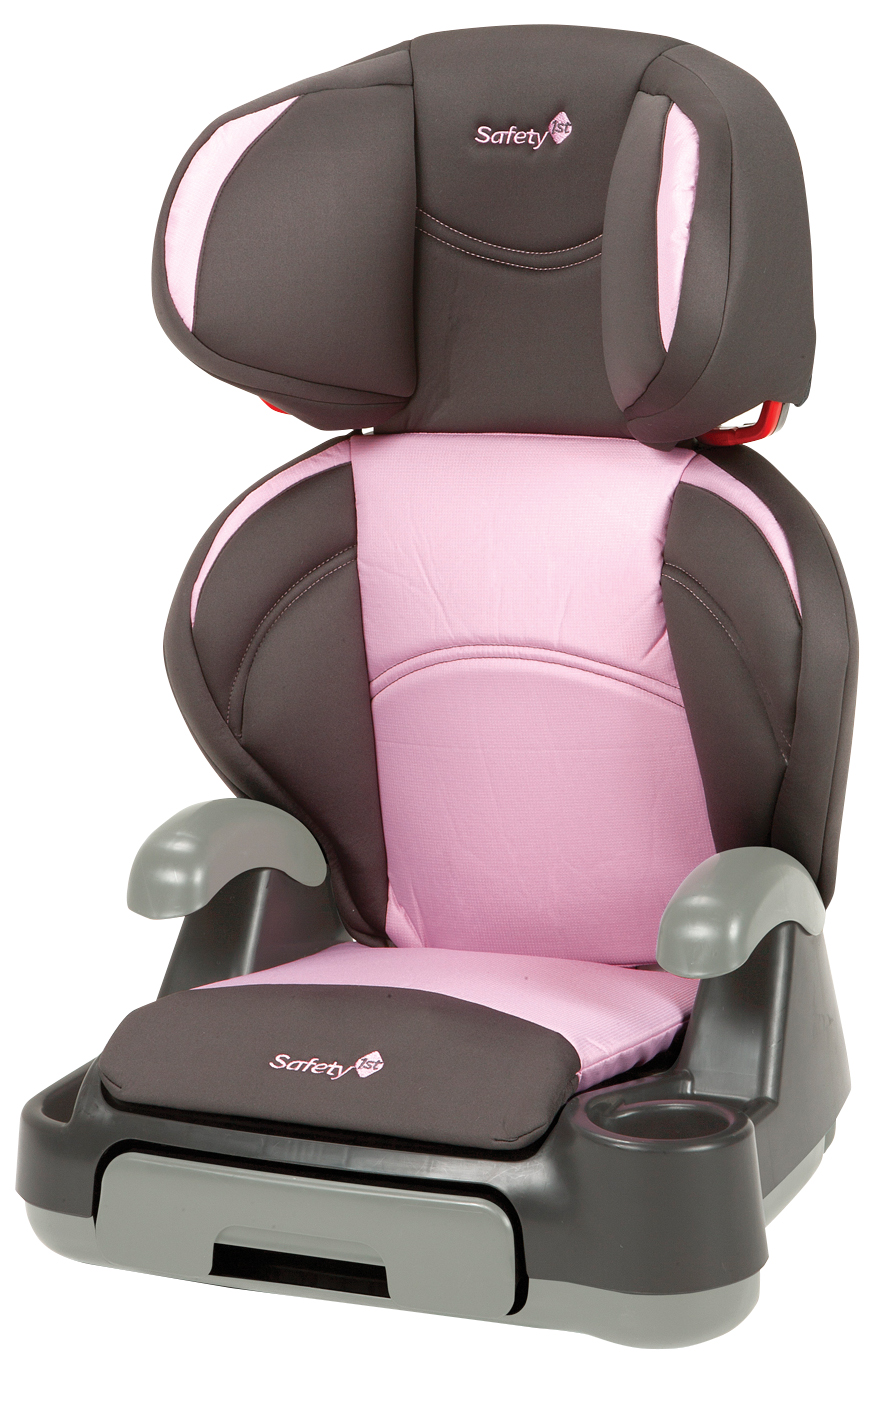 Safety 1st Store 'n Go Belt-Positioning Booster Car Seat, Nora - image 2 of 5